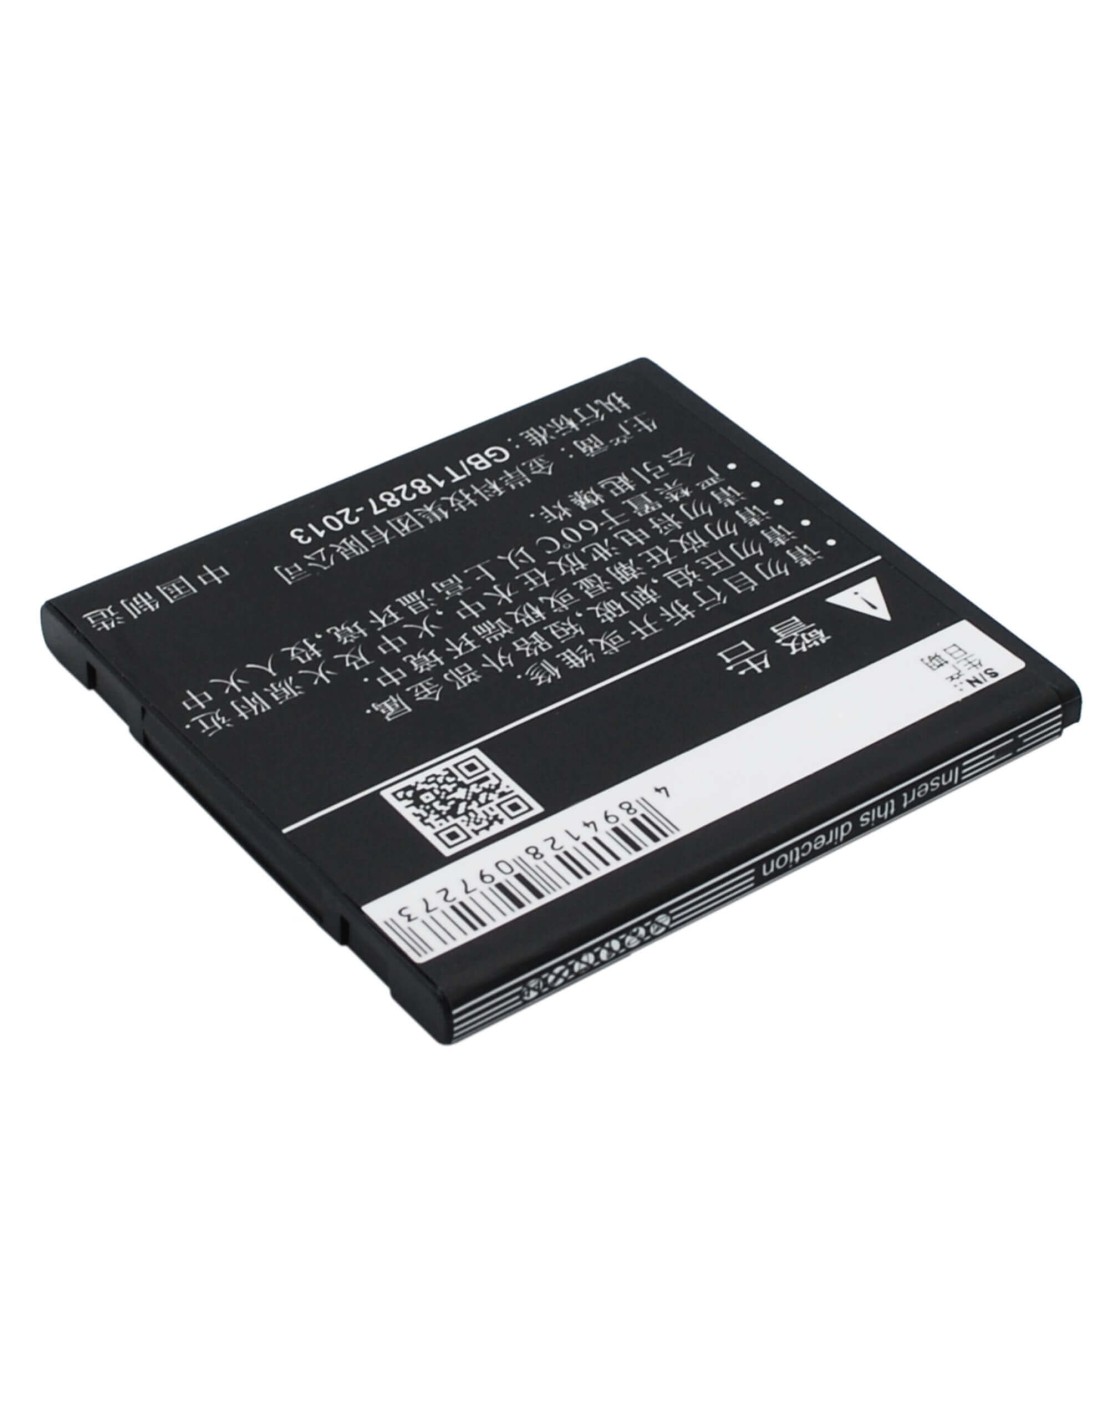 Battery for Coolpad 9930, W702 3.7V, 1200mAh - 4.44Wh